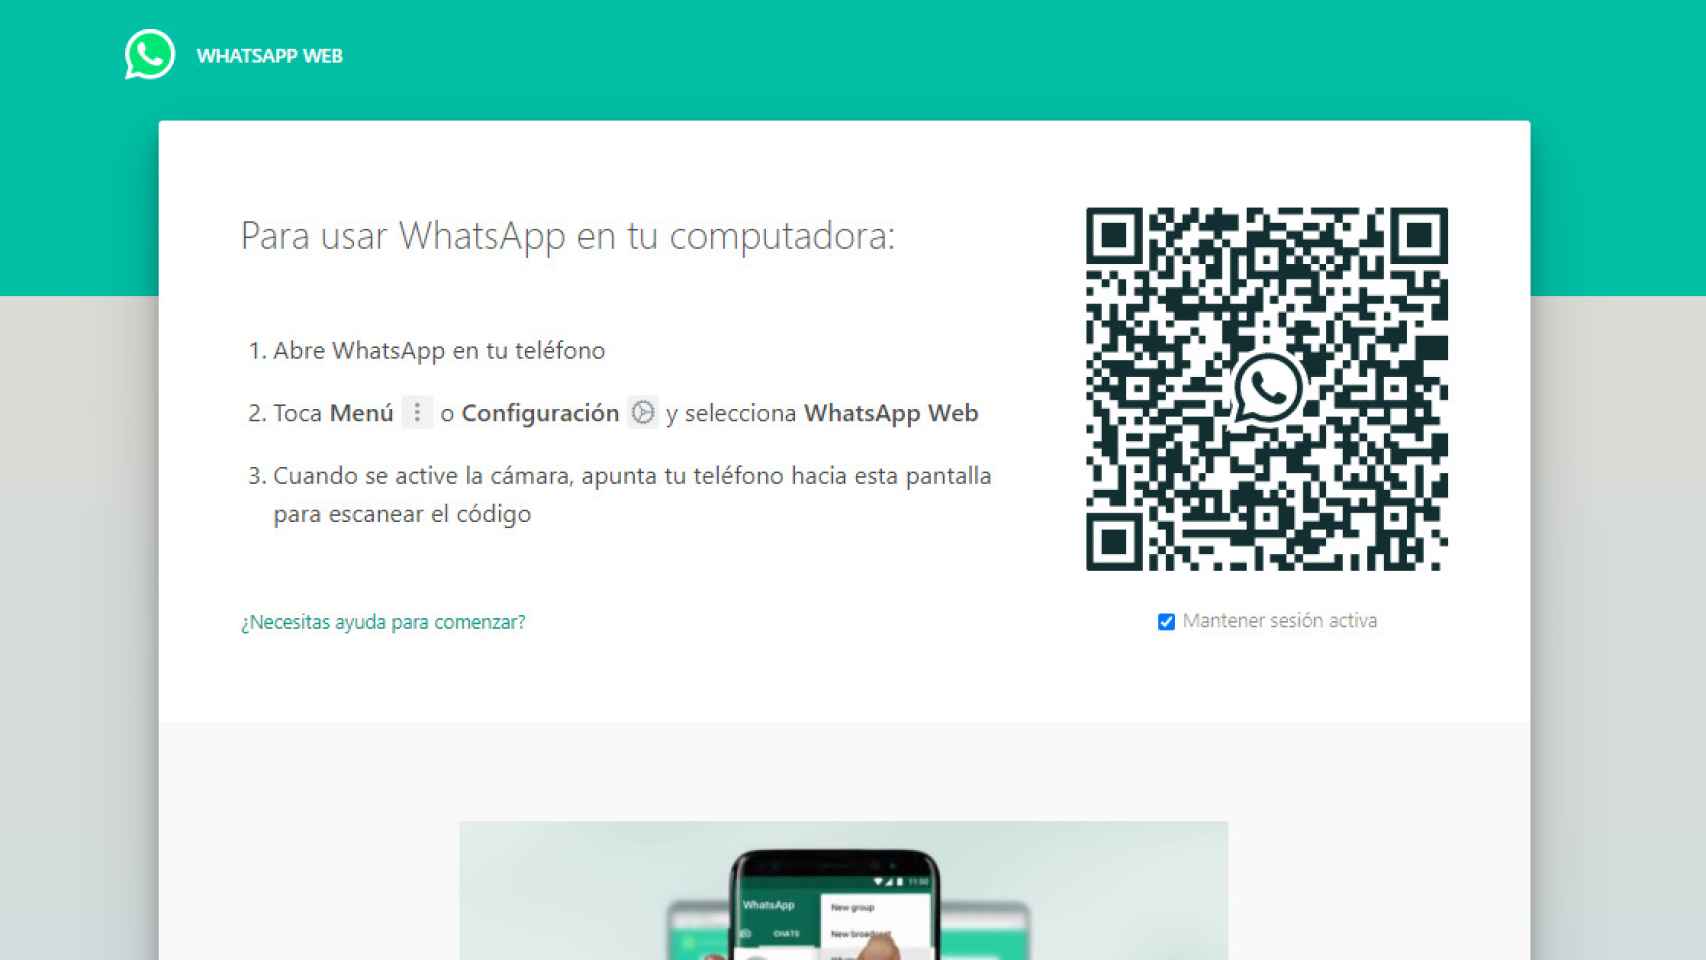 whatsapp business web for pc